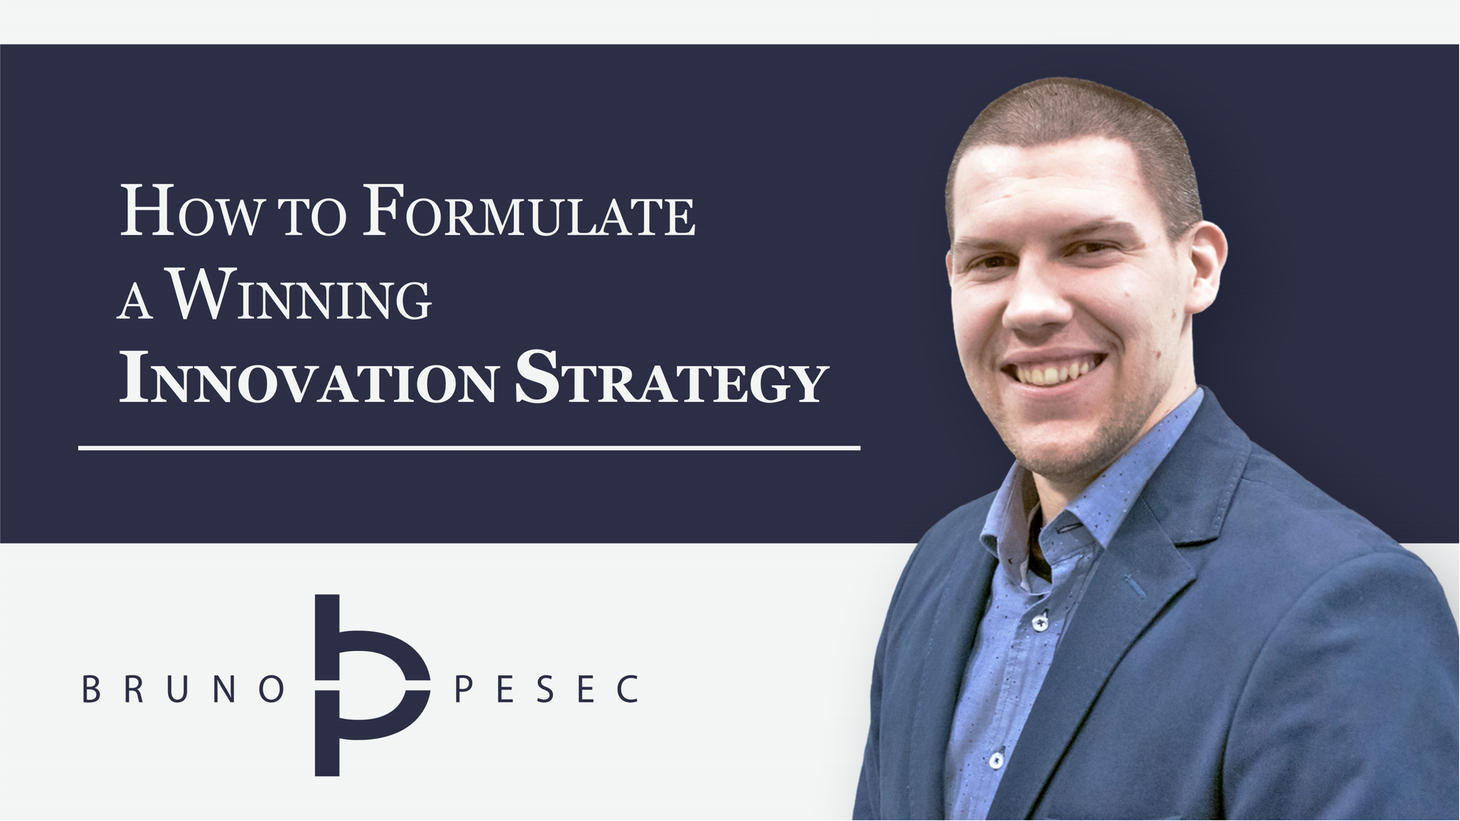 How to formulate a winning innovation strategy